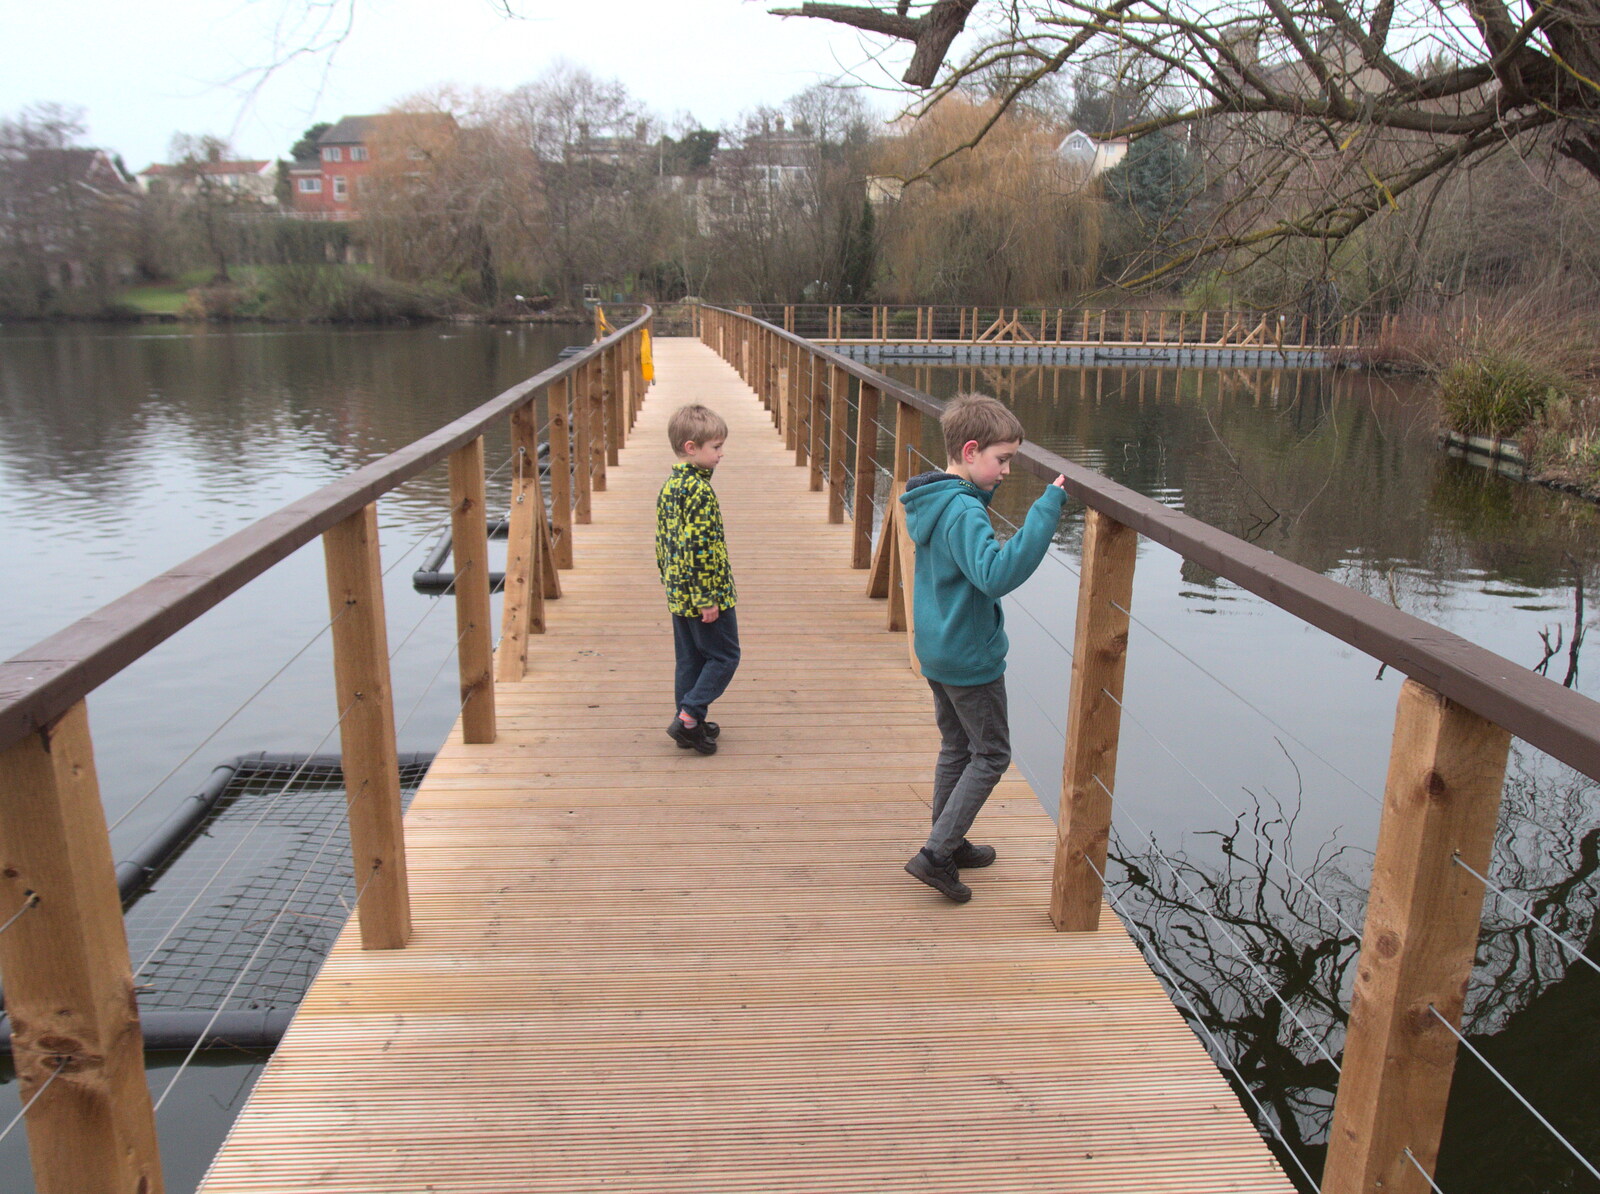 We explore the new boardwalk across the Mere from January Misc: Haircut 100, Diss, Norfolk - 14th January 2018